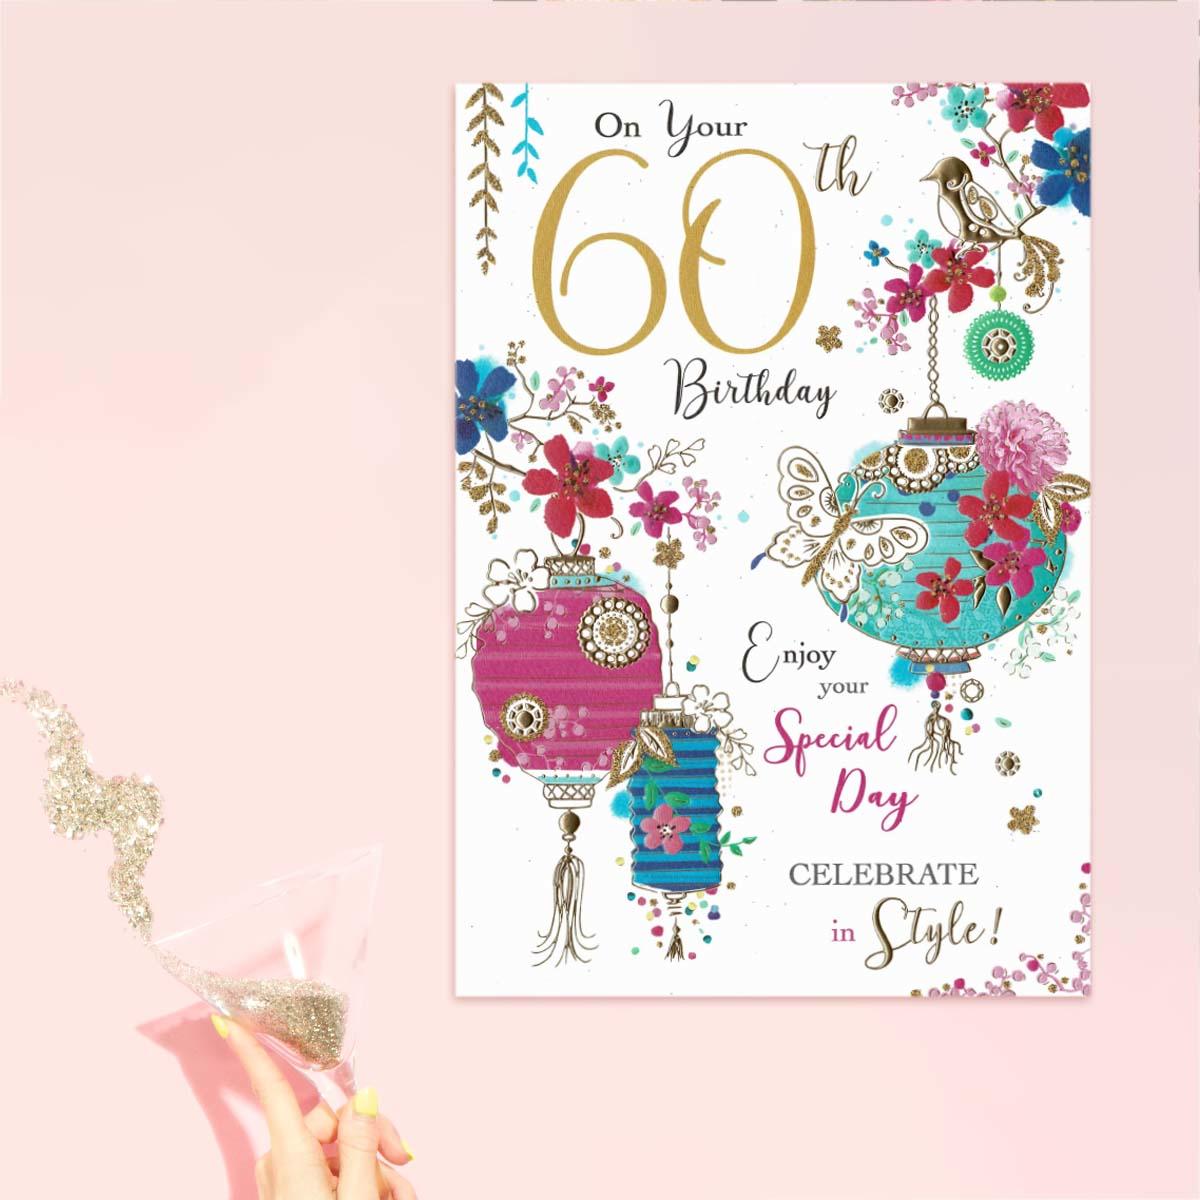 On Your 60th Birthday Lanterns Card Front Image